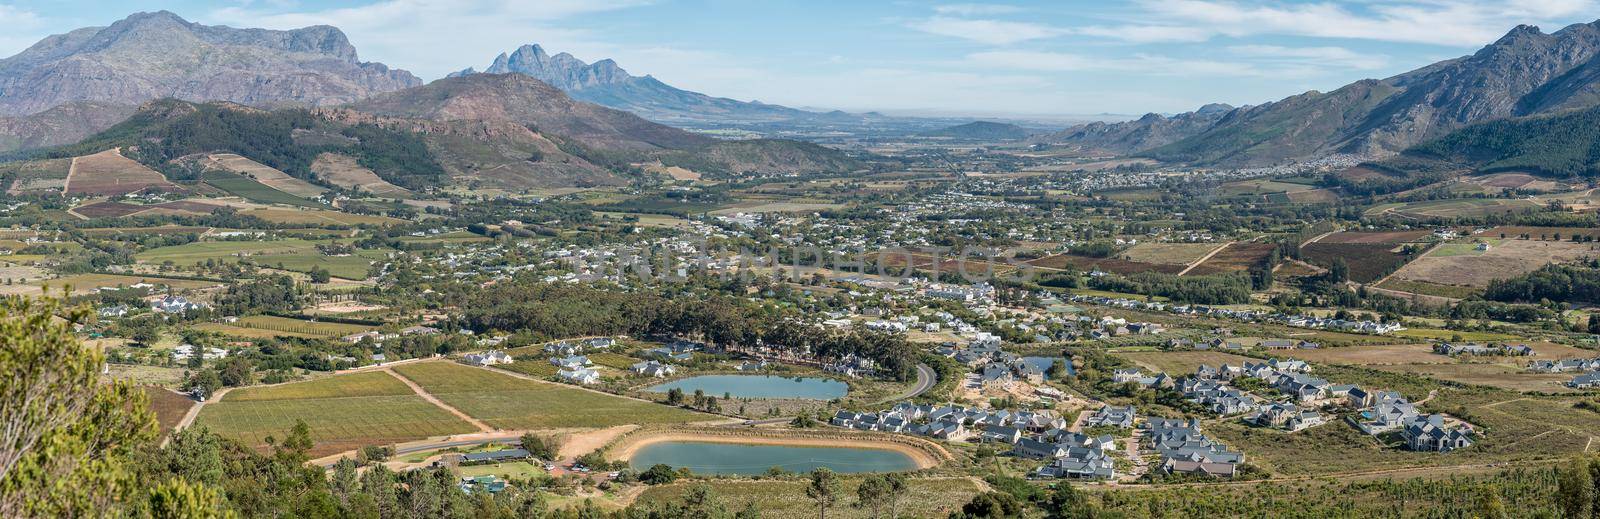 Panoramic view of Franschhoek in the Western Cape Province, as seen from the Franchhoek Pass